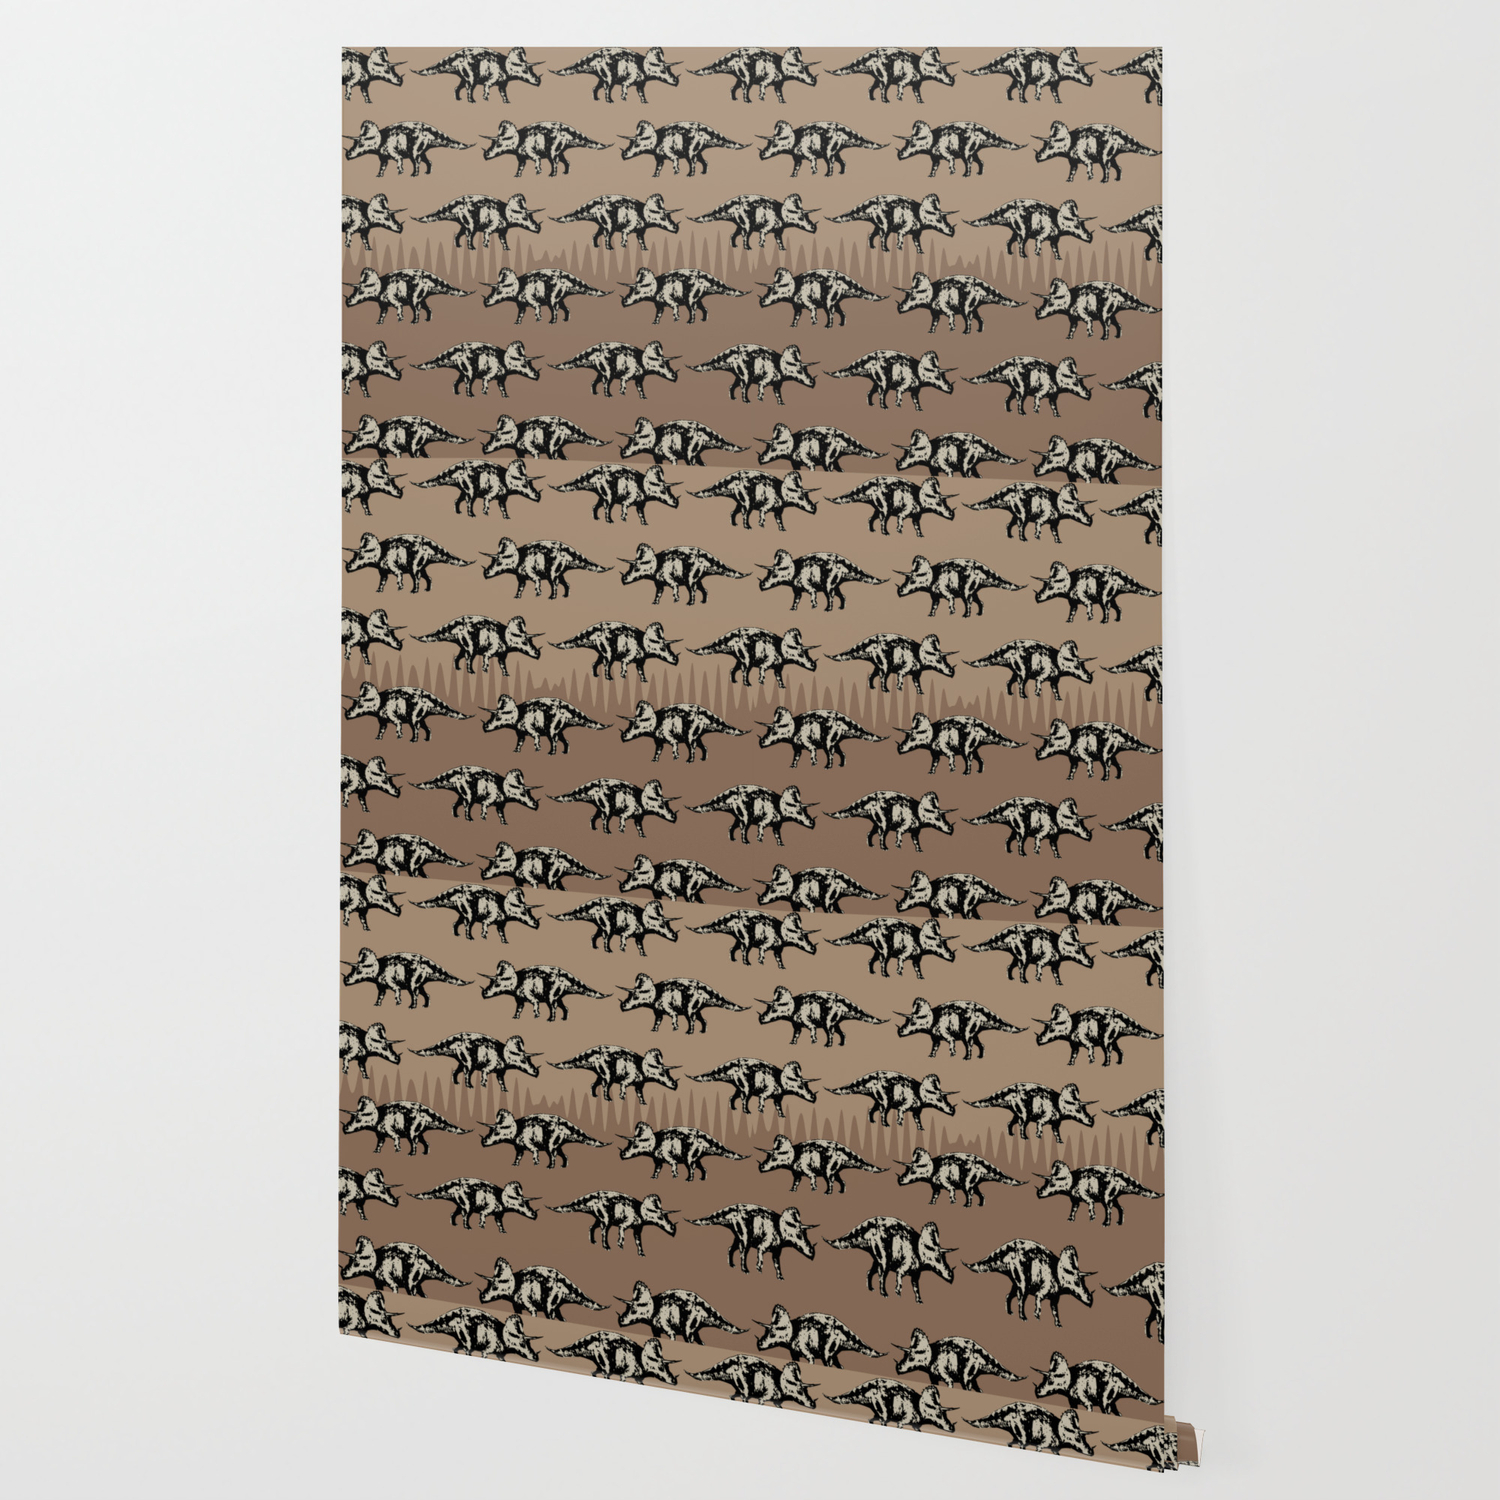 ChocoPaleo: Triceratops Wallpaper by